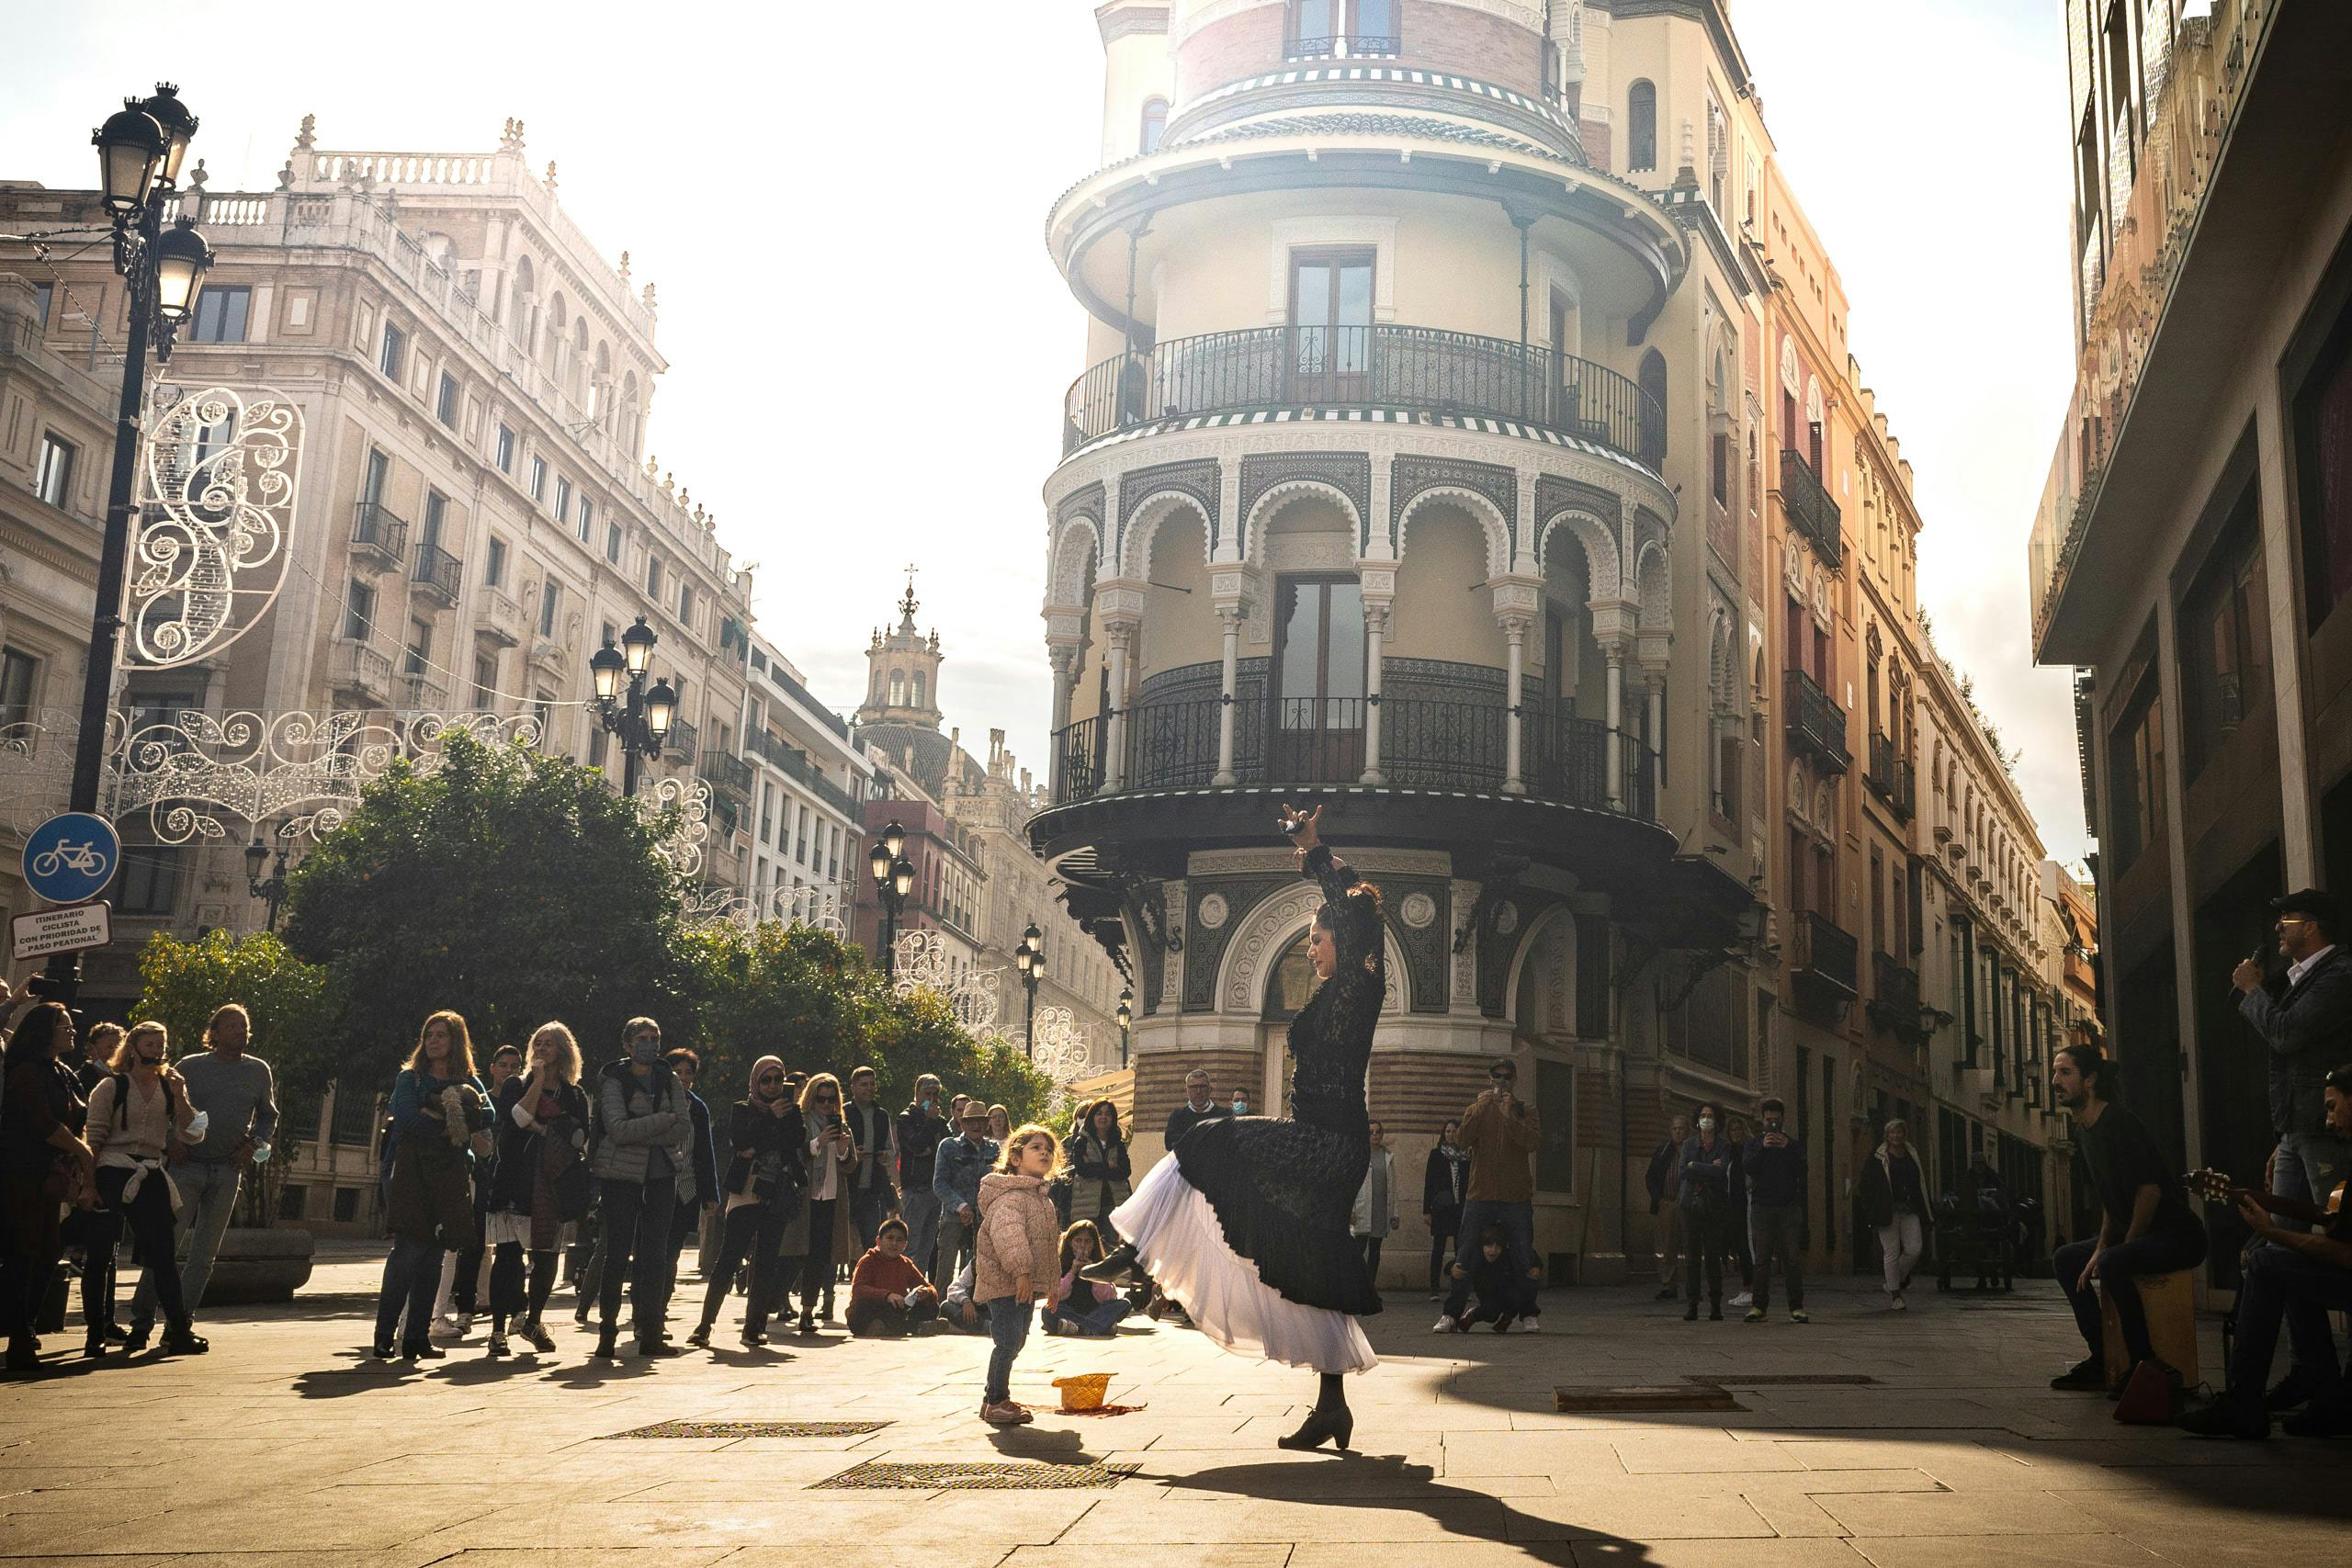 Flamenco dancer flourishes in front of young girl in the middle of the street